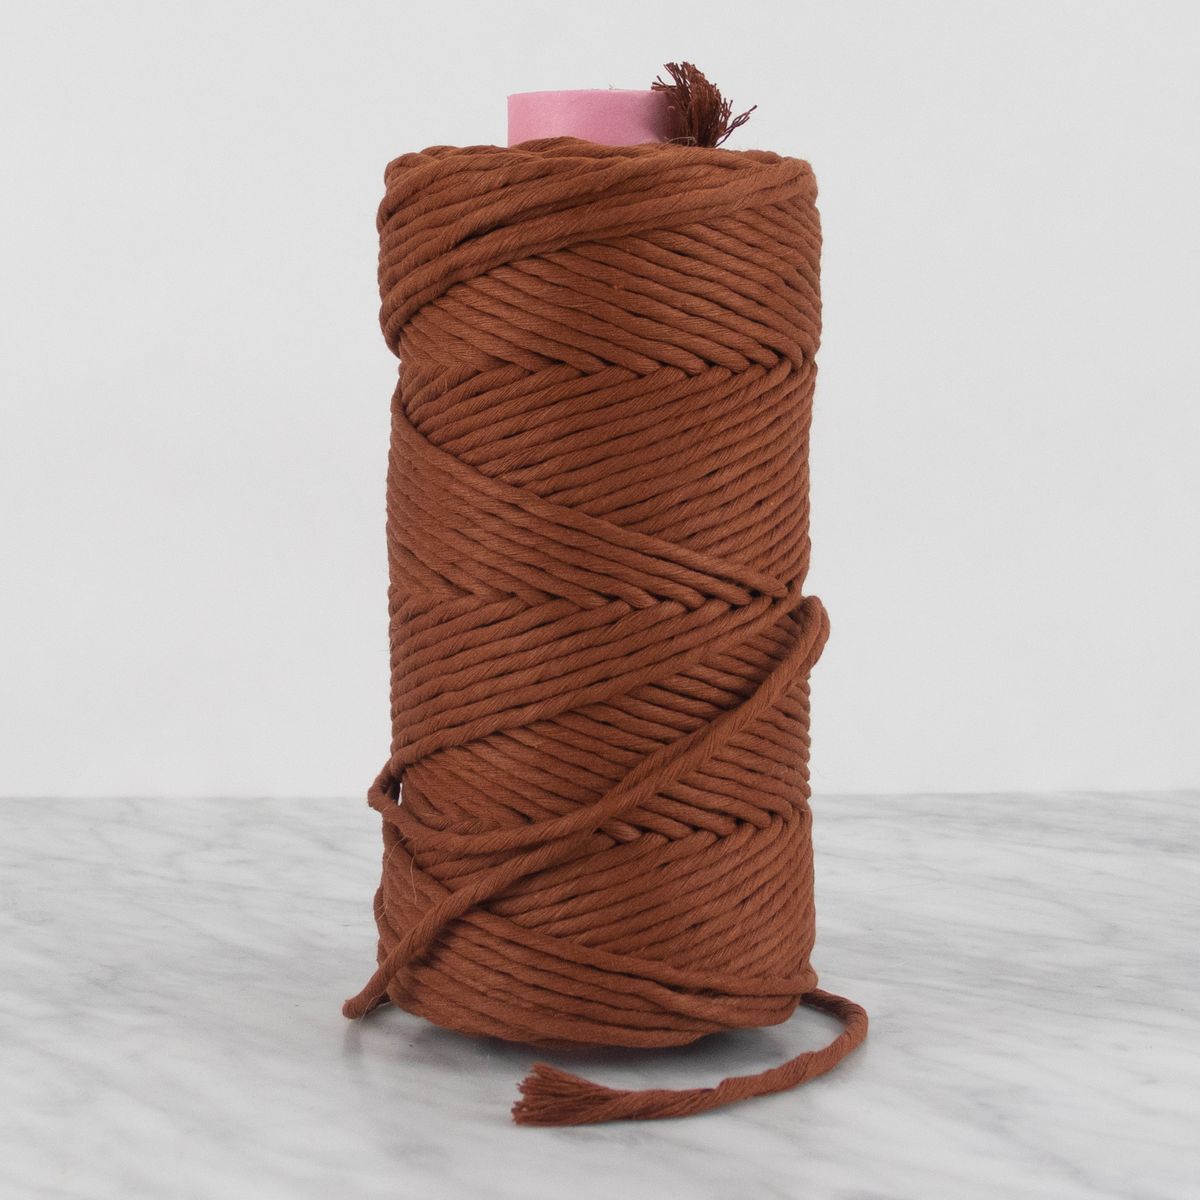 5mm Recycled Cotton String 0.5 kg - Cinnamon